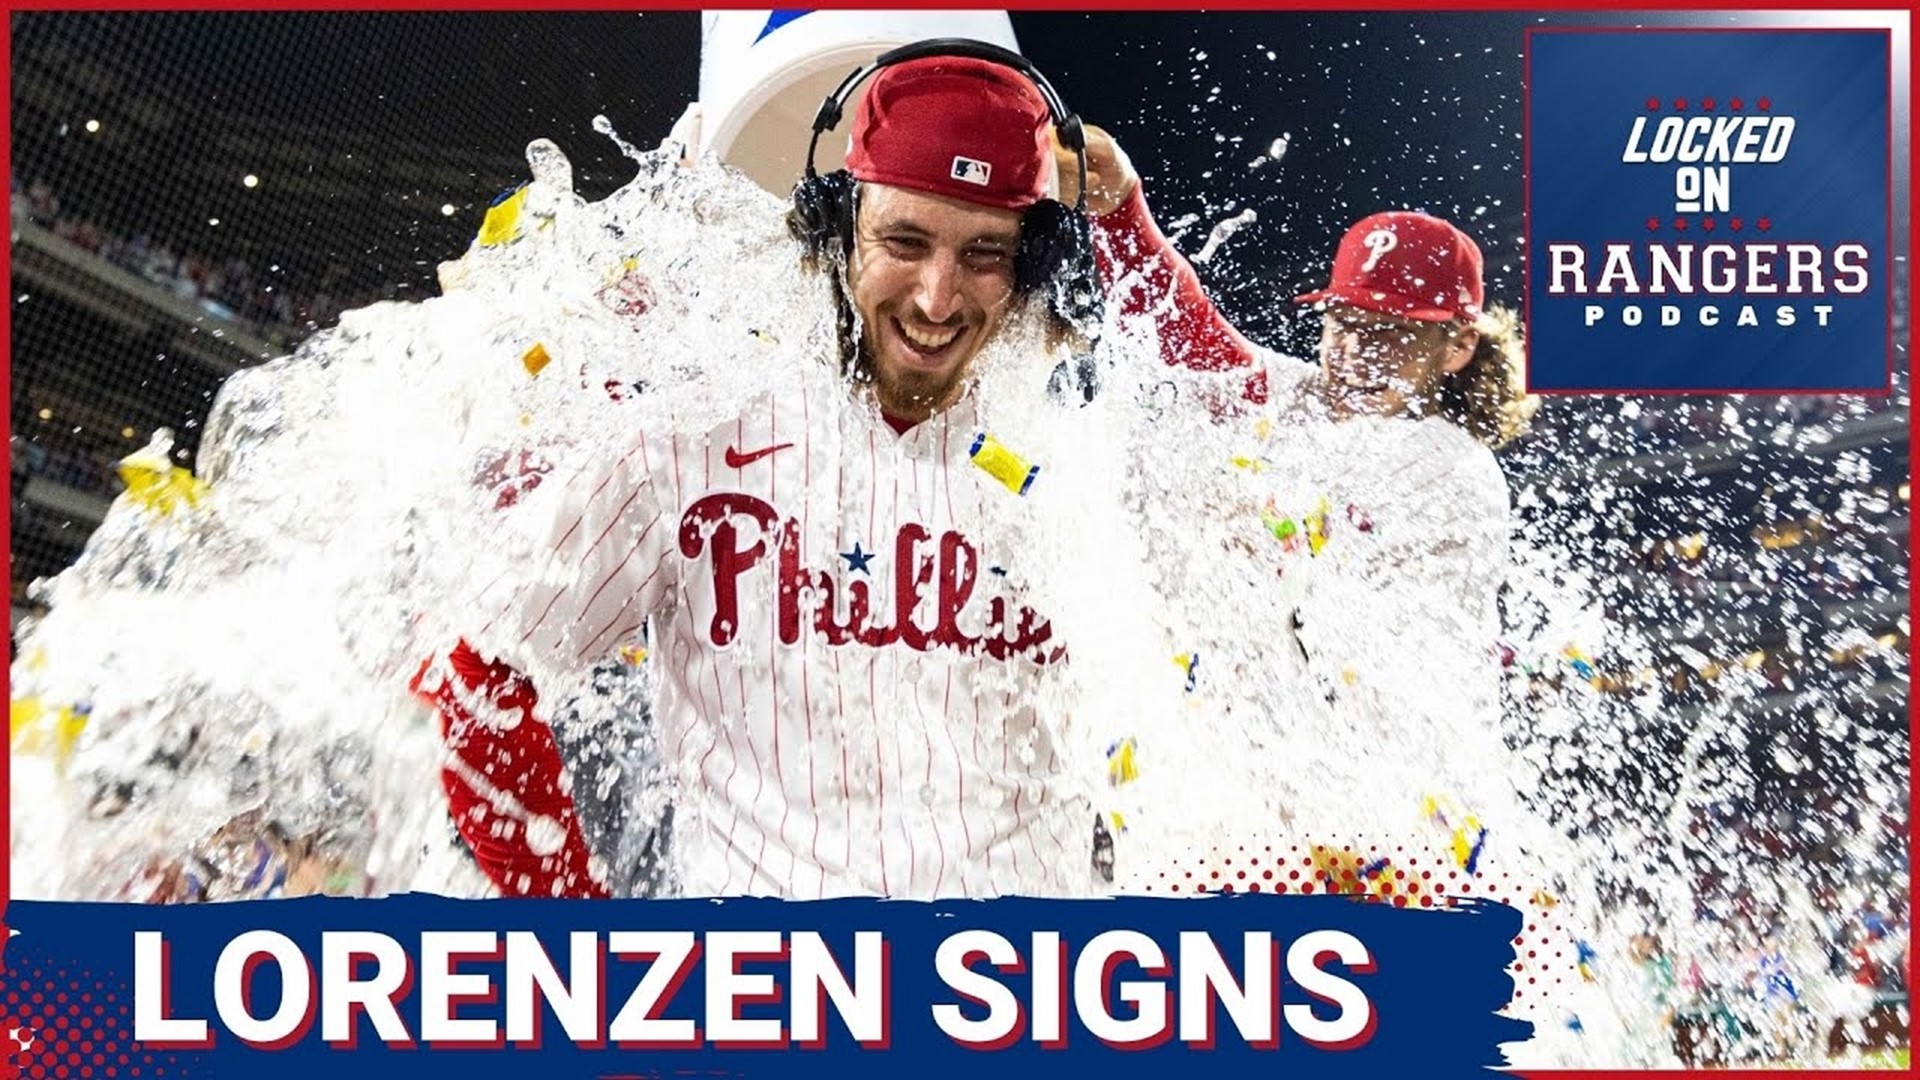 The Texas Rangers signed Michael Lorenzen to a one-year deal coming off an All-Star season with the Detroit Tigers and Philadelphia Phillies.